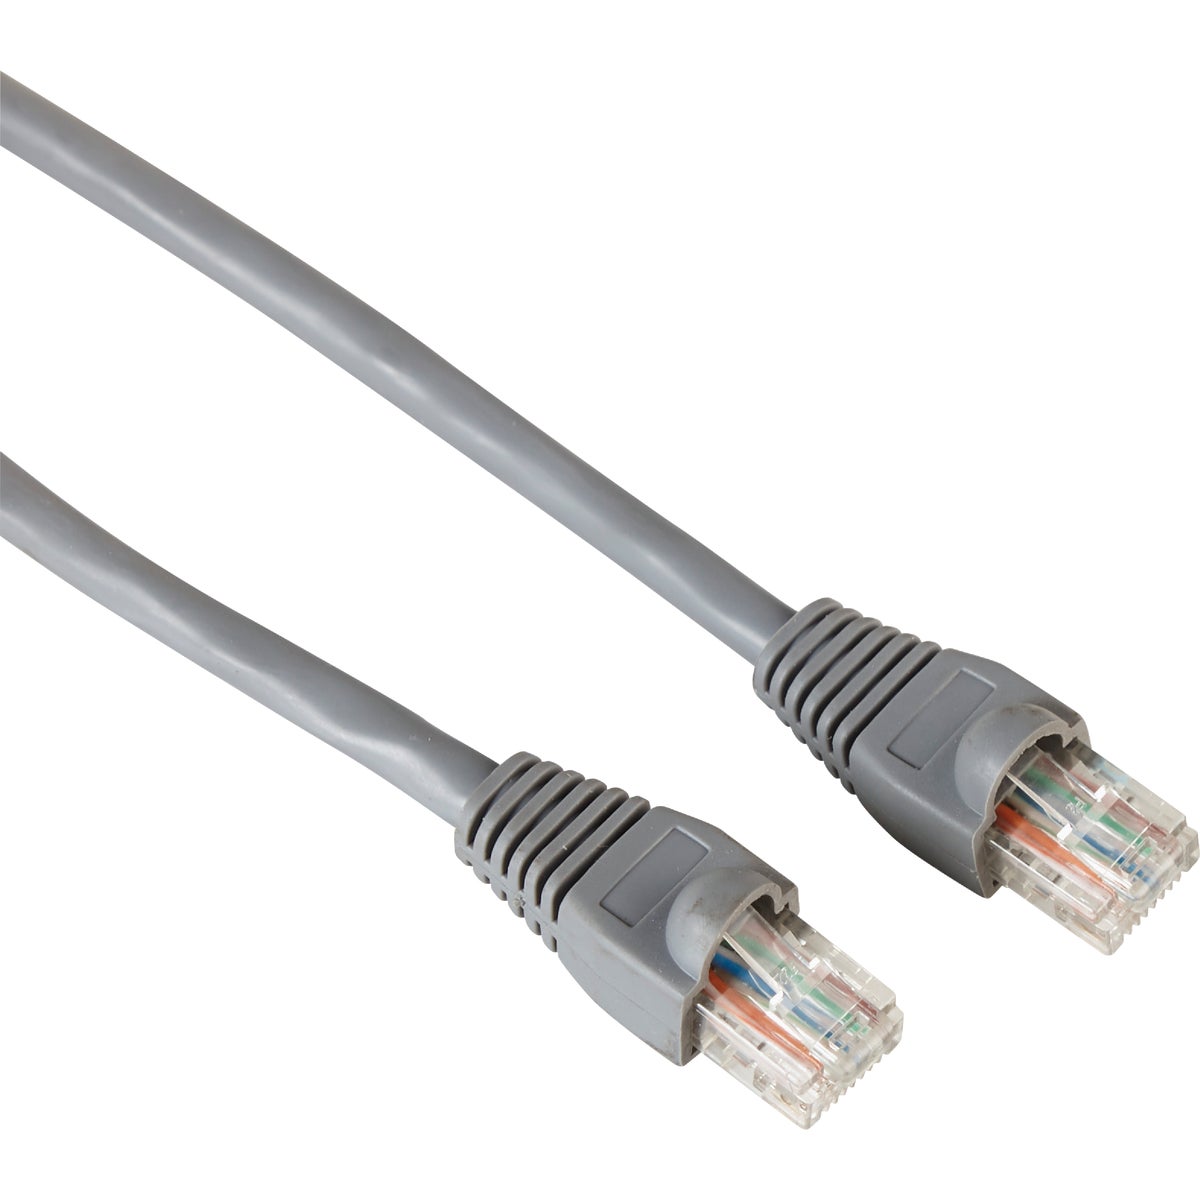 RCA TPH632R RCA 25 Ft. CAT-6 Gray Network Cable TPH632R